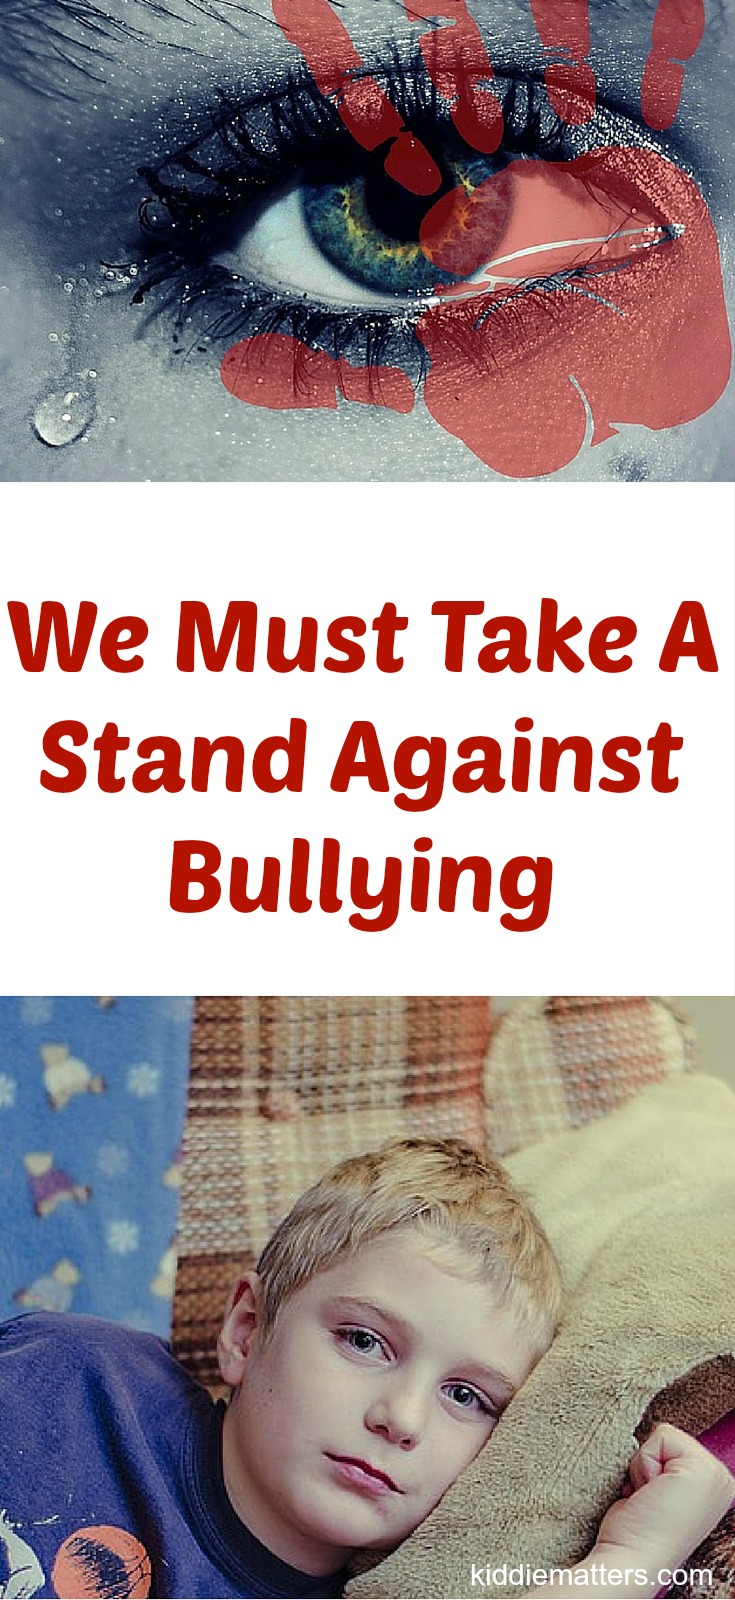 We Must Take A Stand Against Bullying